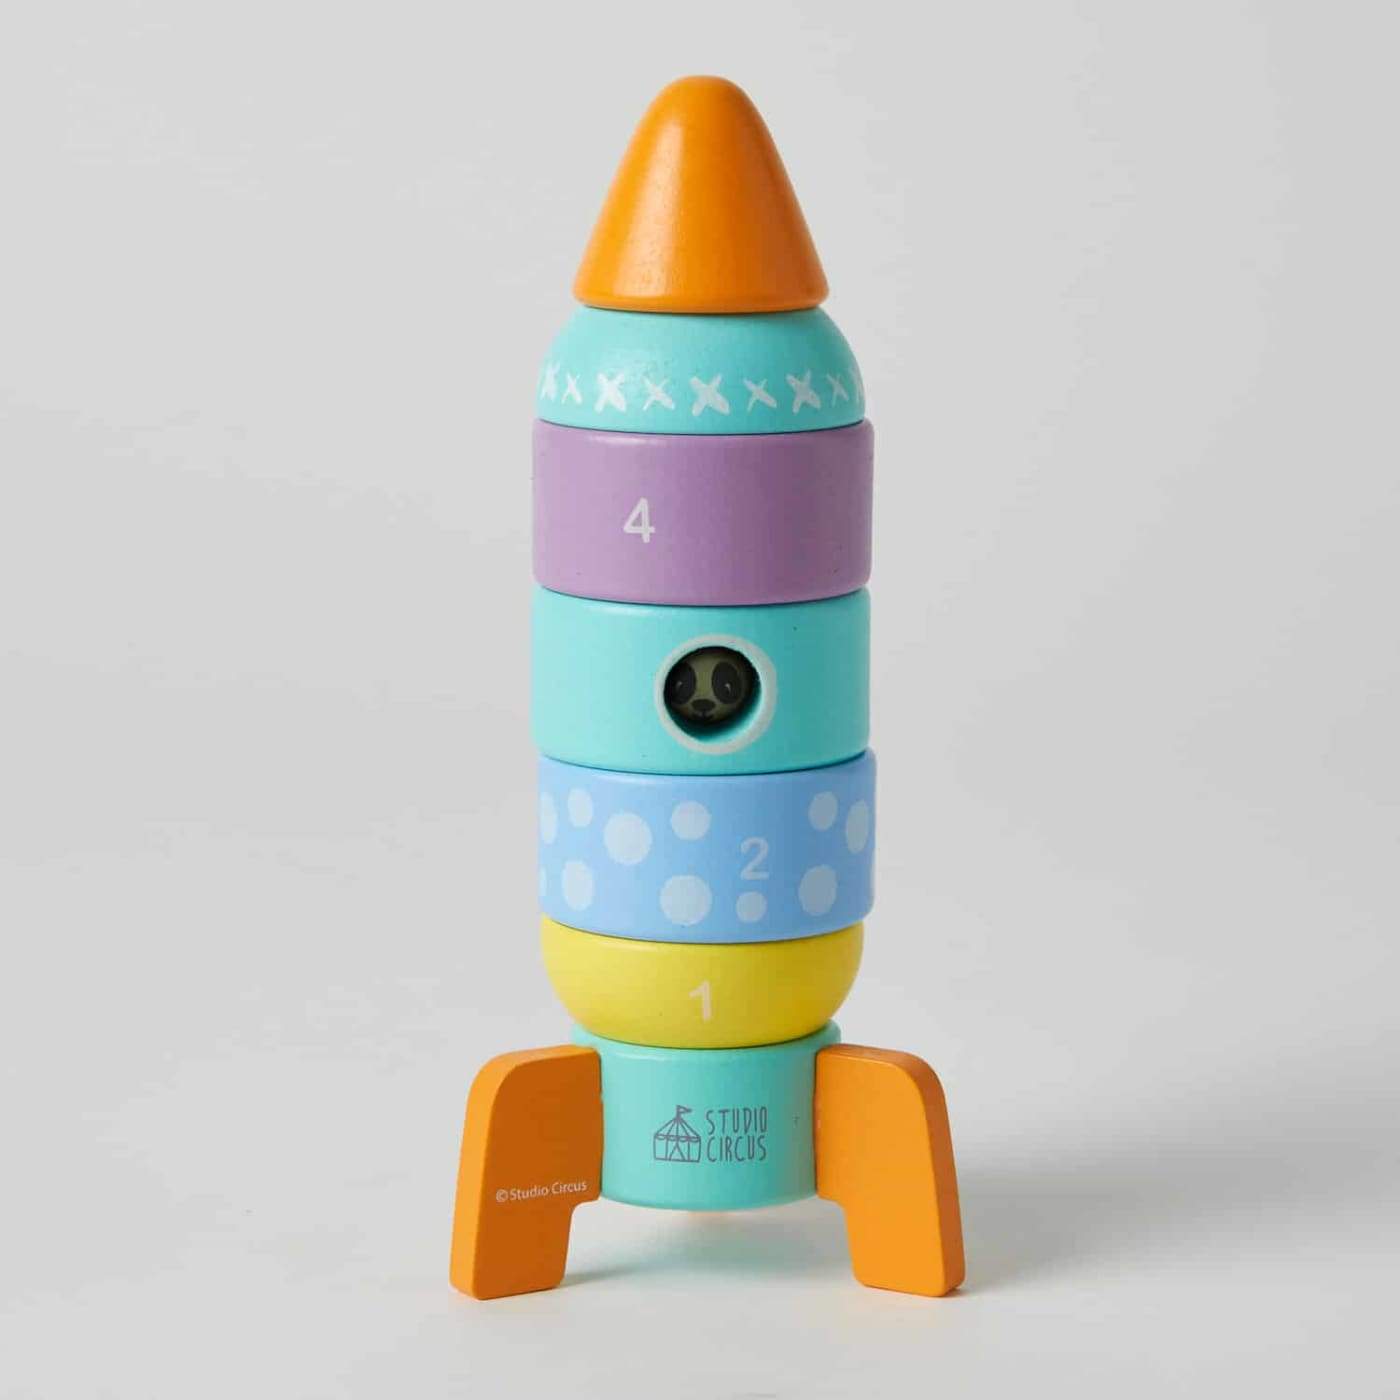 Sudio Circus Rocket Tower - TOYS & PLAY - HAND HELD/EDUCATIONAL